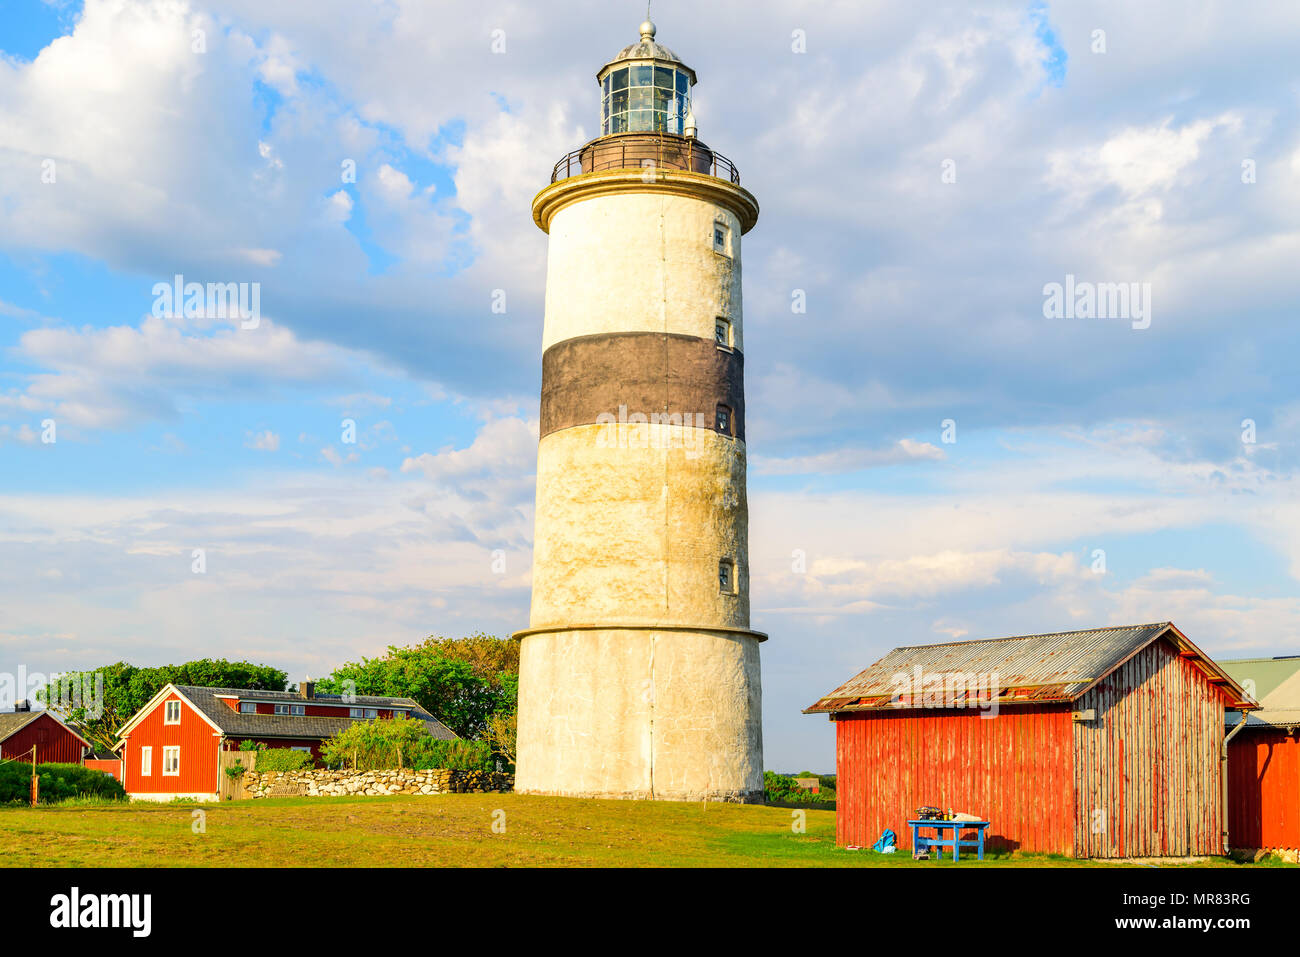 The lighthouse and surrounding landscape at Morups Tange outside Falkenberg in Sweden. Stock Photo